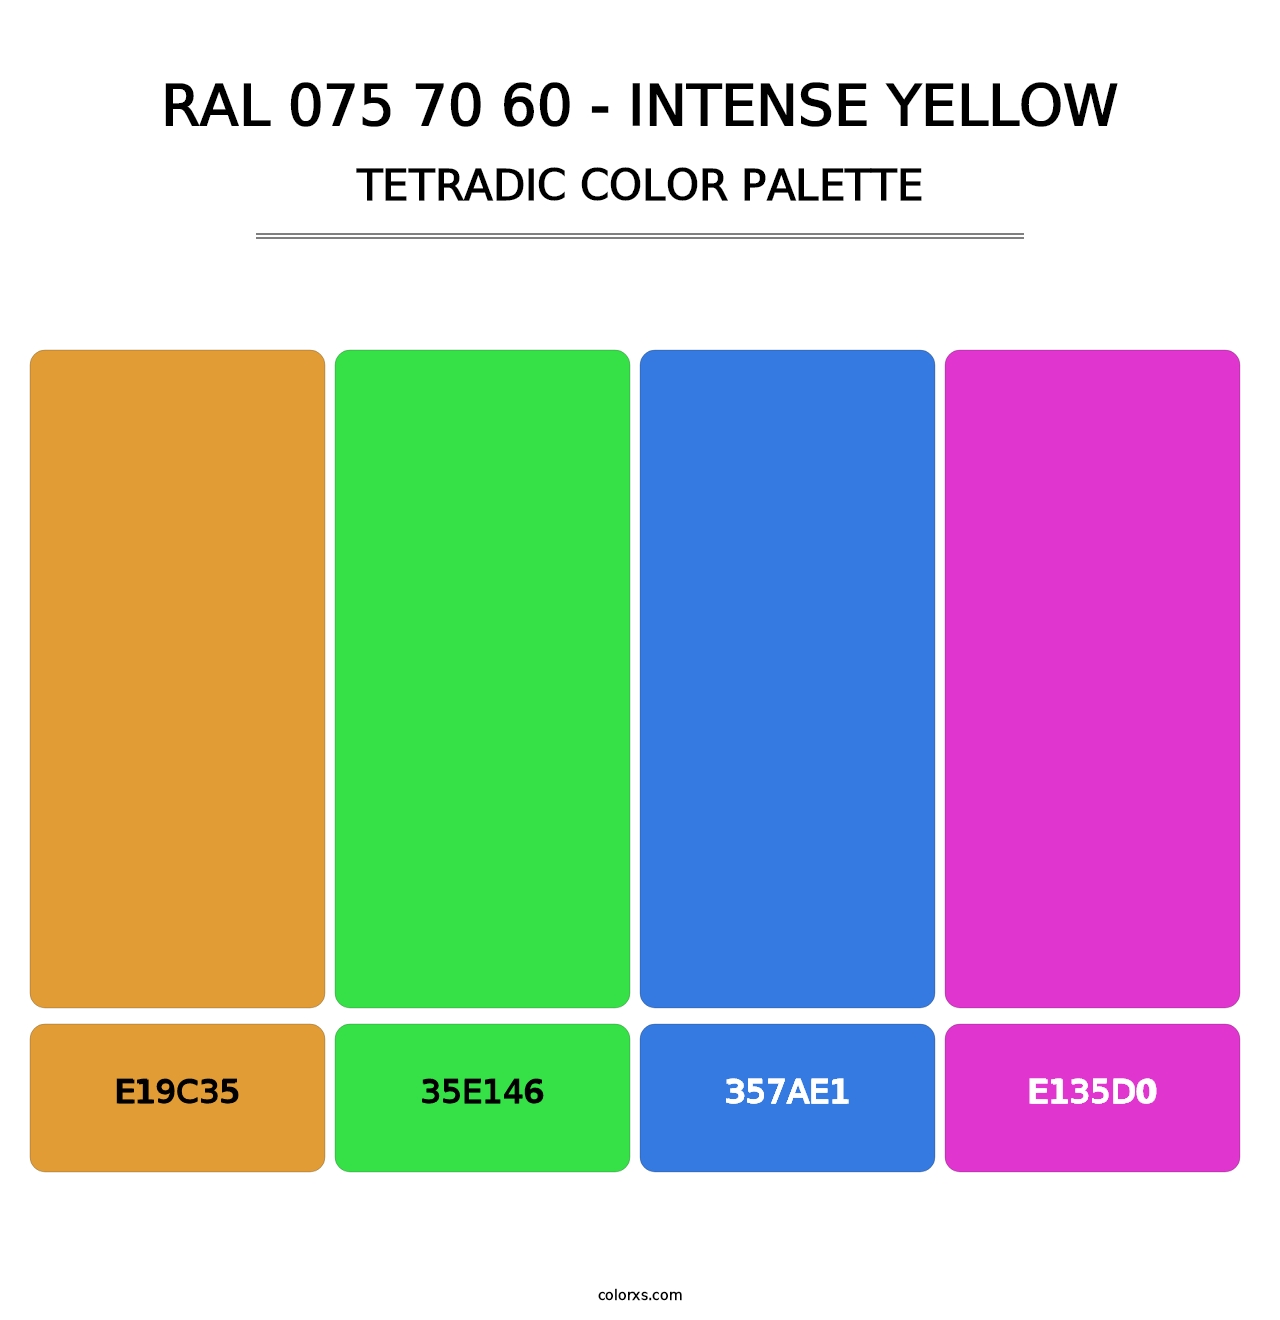 RAL 075 70 60 - Intense Yellow - Tetradic Color Palette